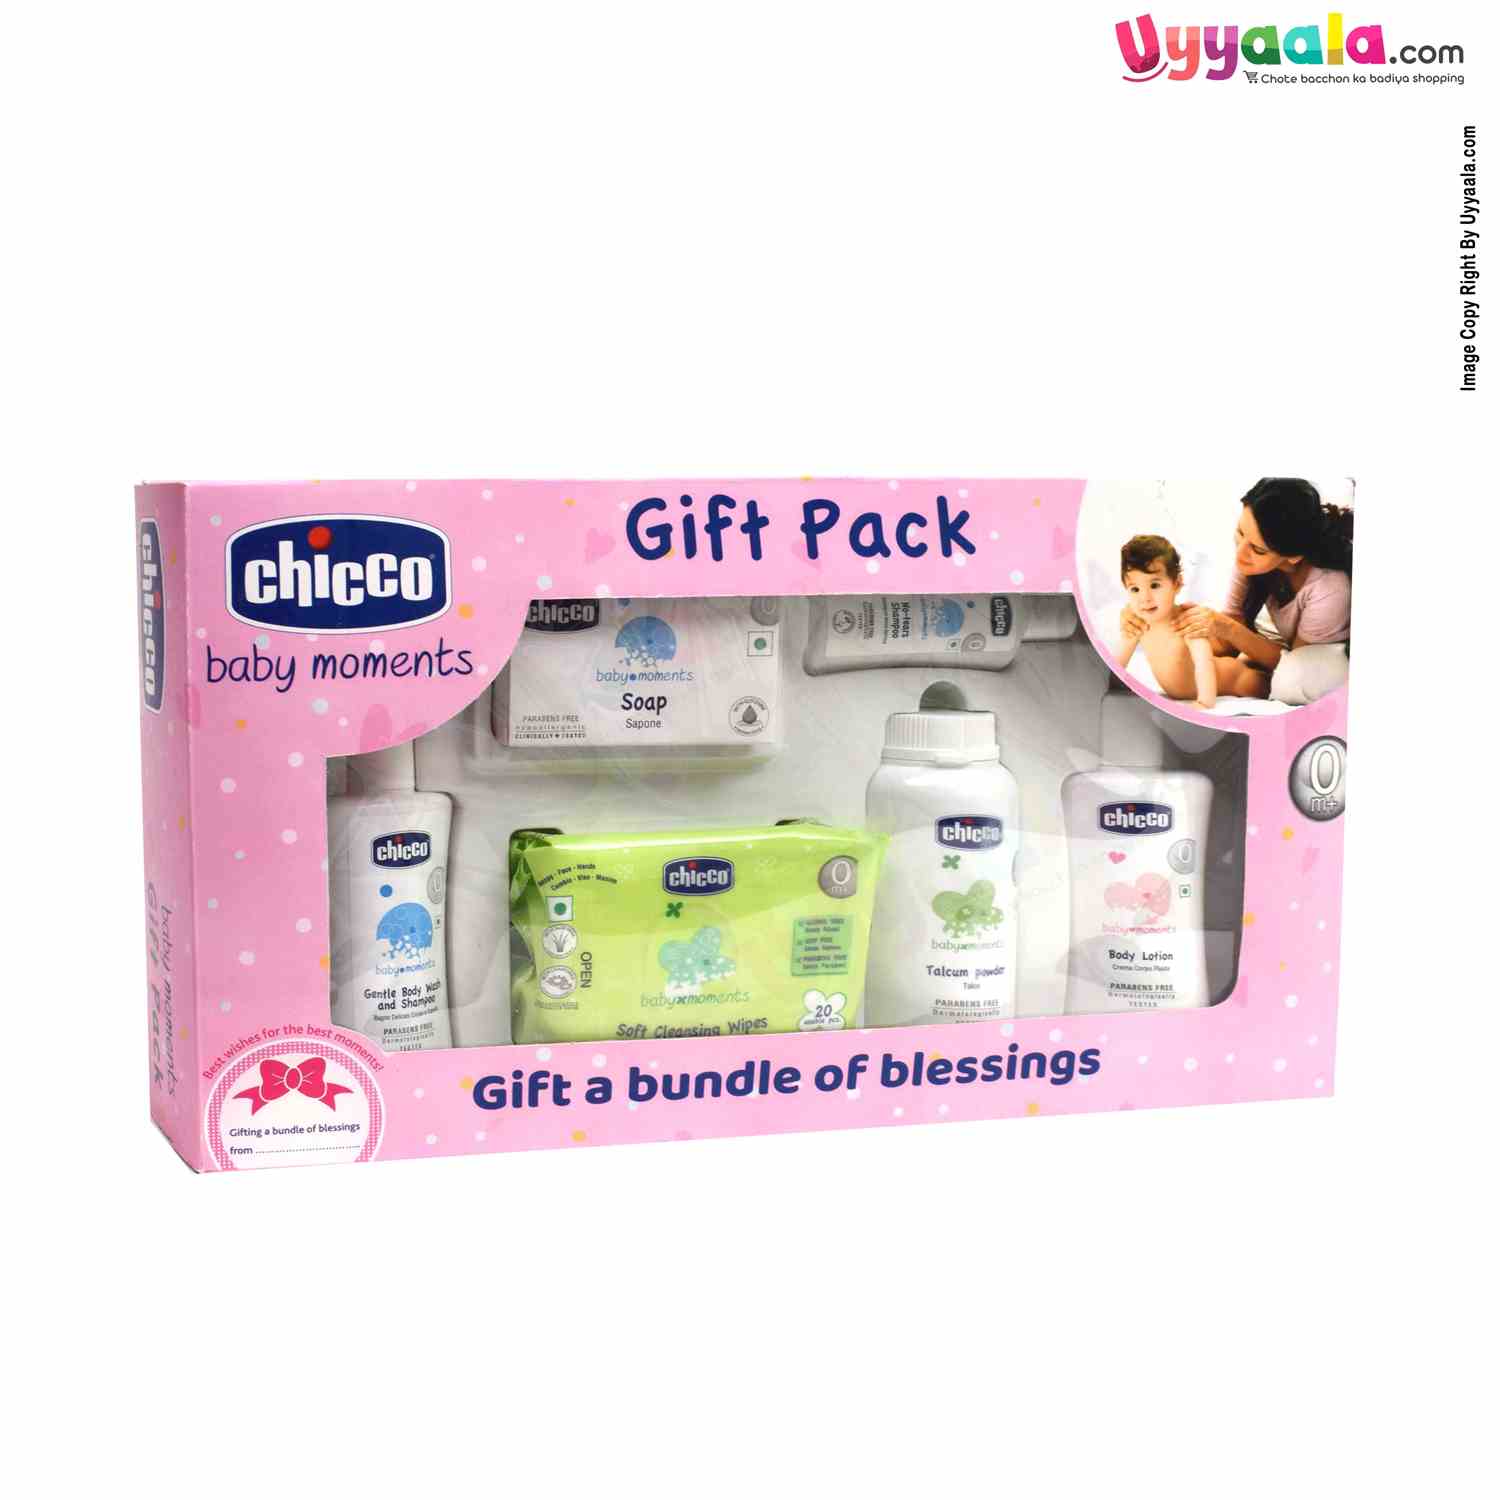 Gift pack for babies